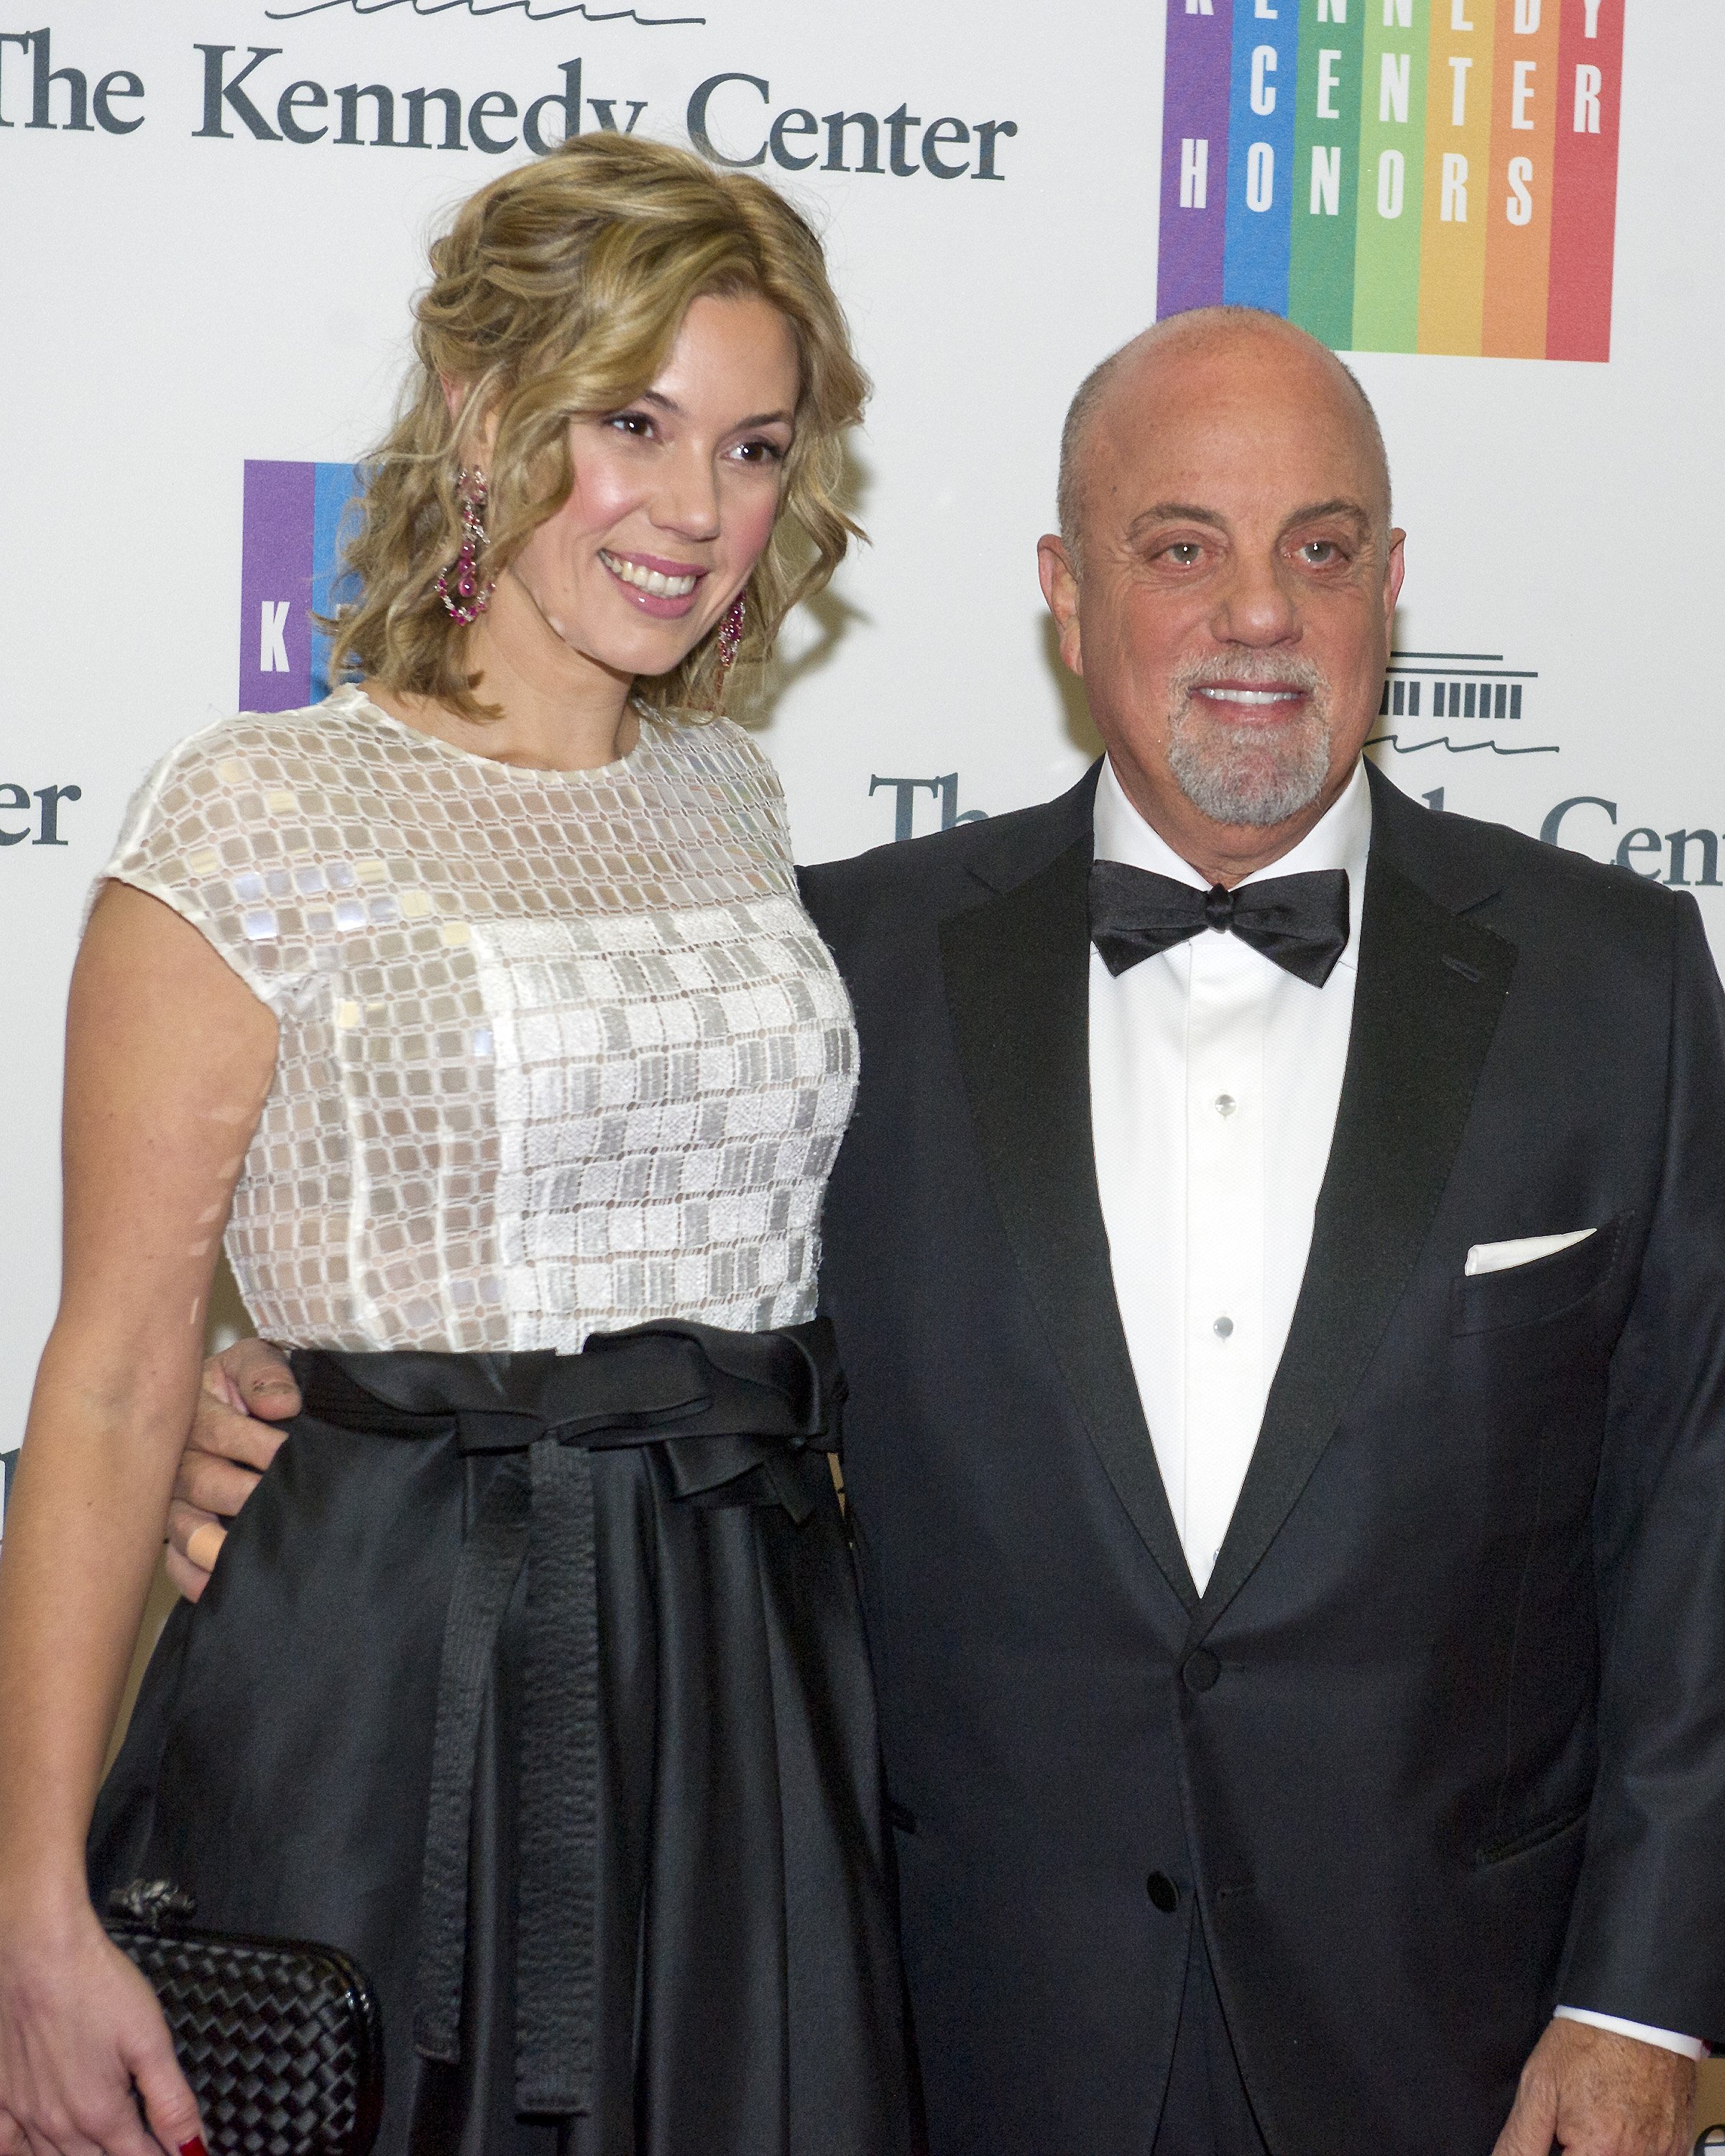 Billy Joel and Alexis Roderick arriving at the formal Artist's Dinner at the U.S. Department of State on December 7, 2013 in Washington, D.C. / Source: Getty Images